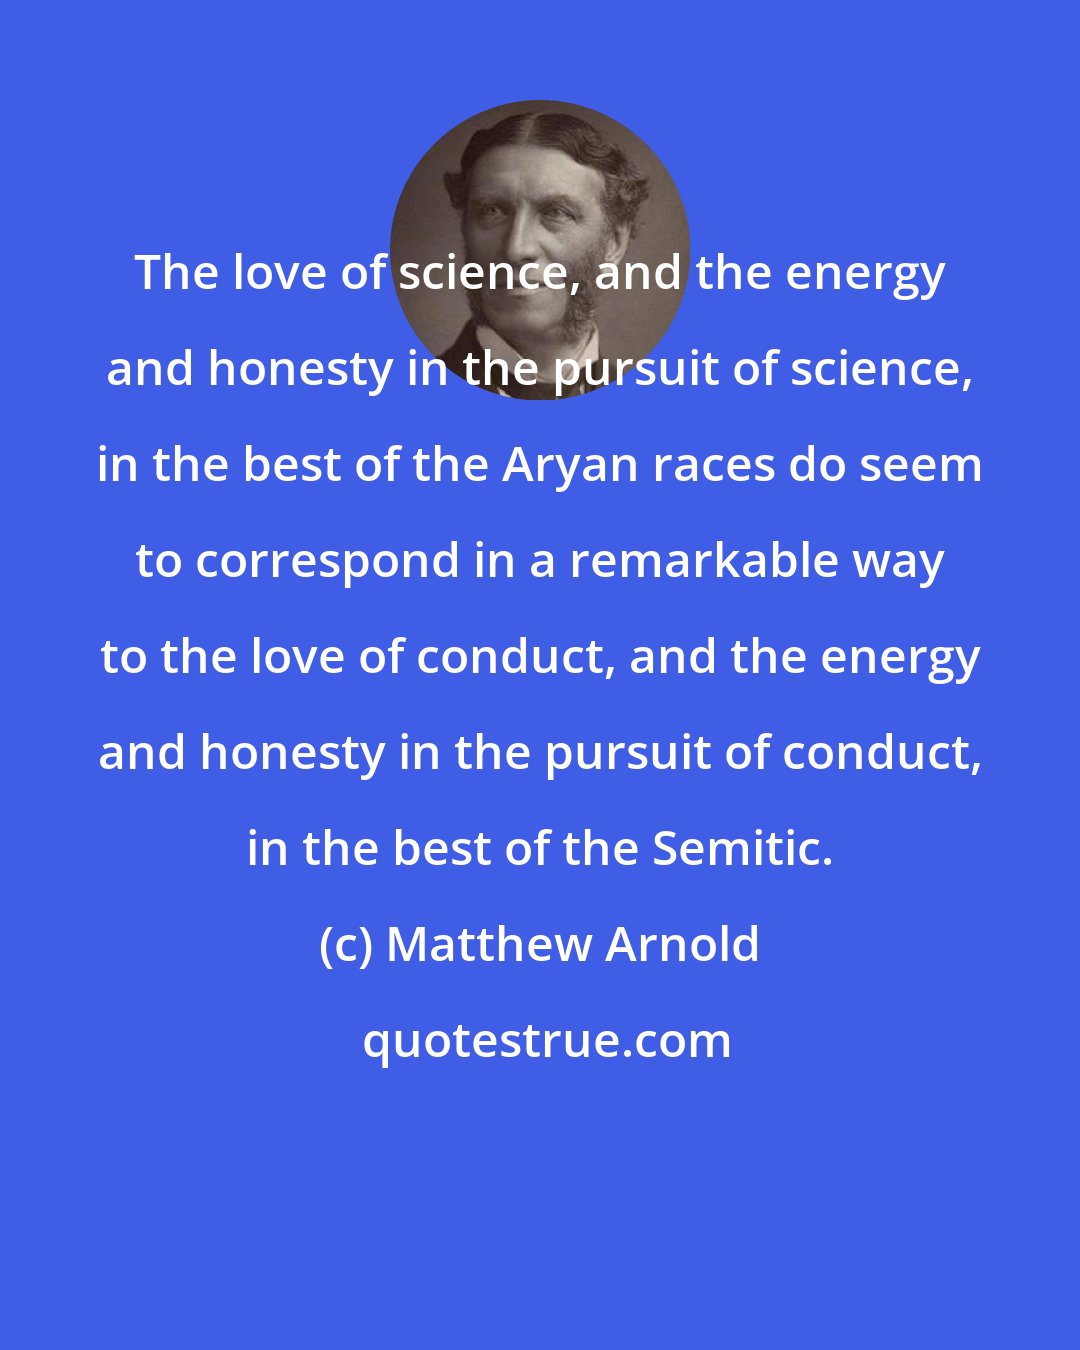 Matthew Arnold: The love of science, and the energy and honesty in the pursuit of science, in the best of the Aryan races do seem to correspond in a remarkable way to the love of conduct, and the energy and honesty in the pursuit of conduct, in the best of the Semitic.